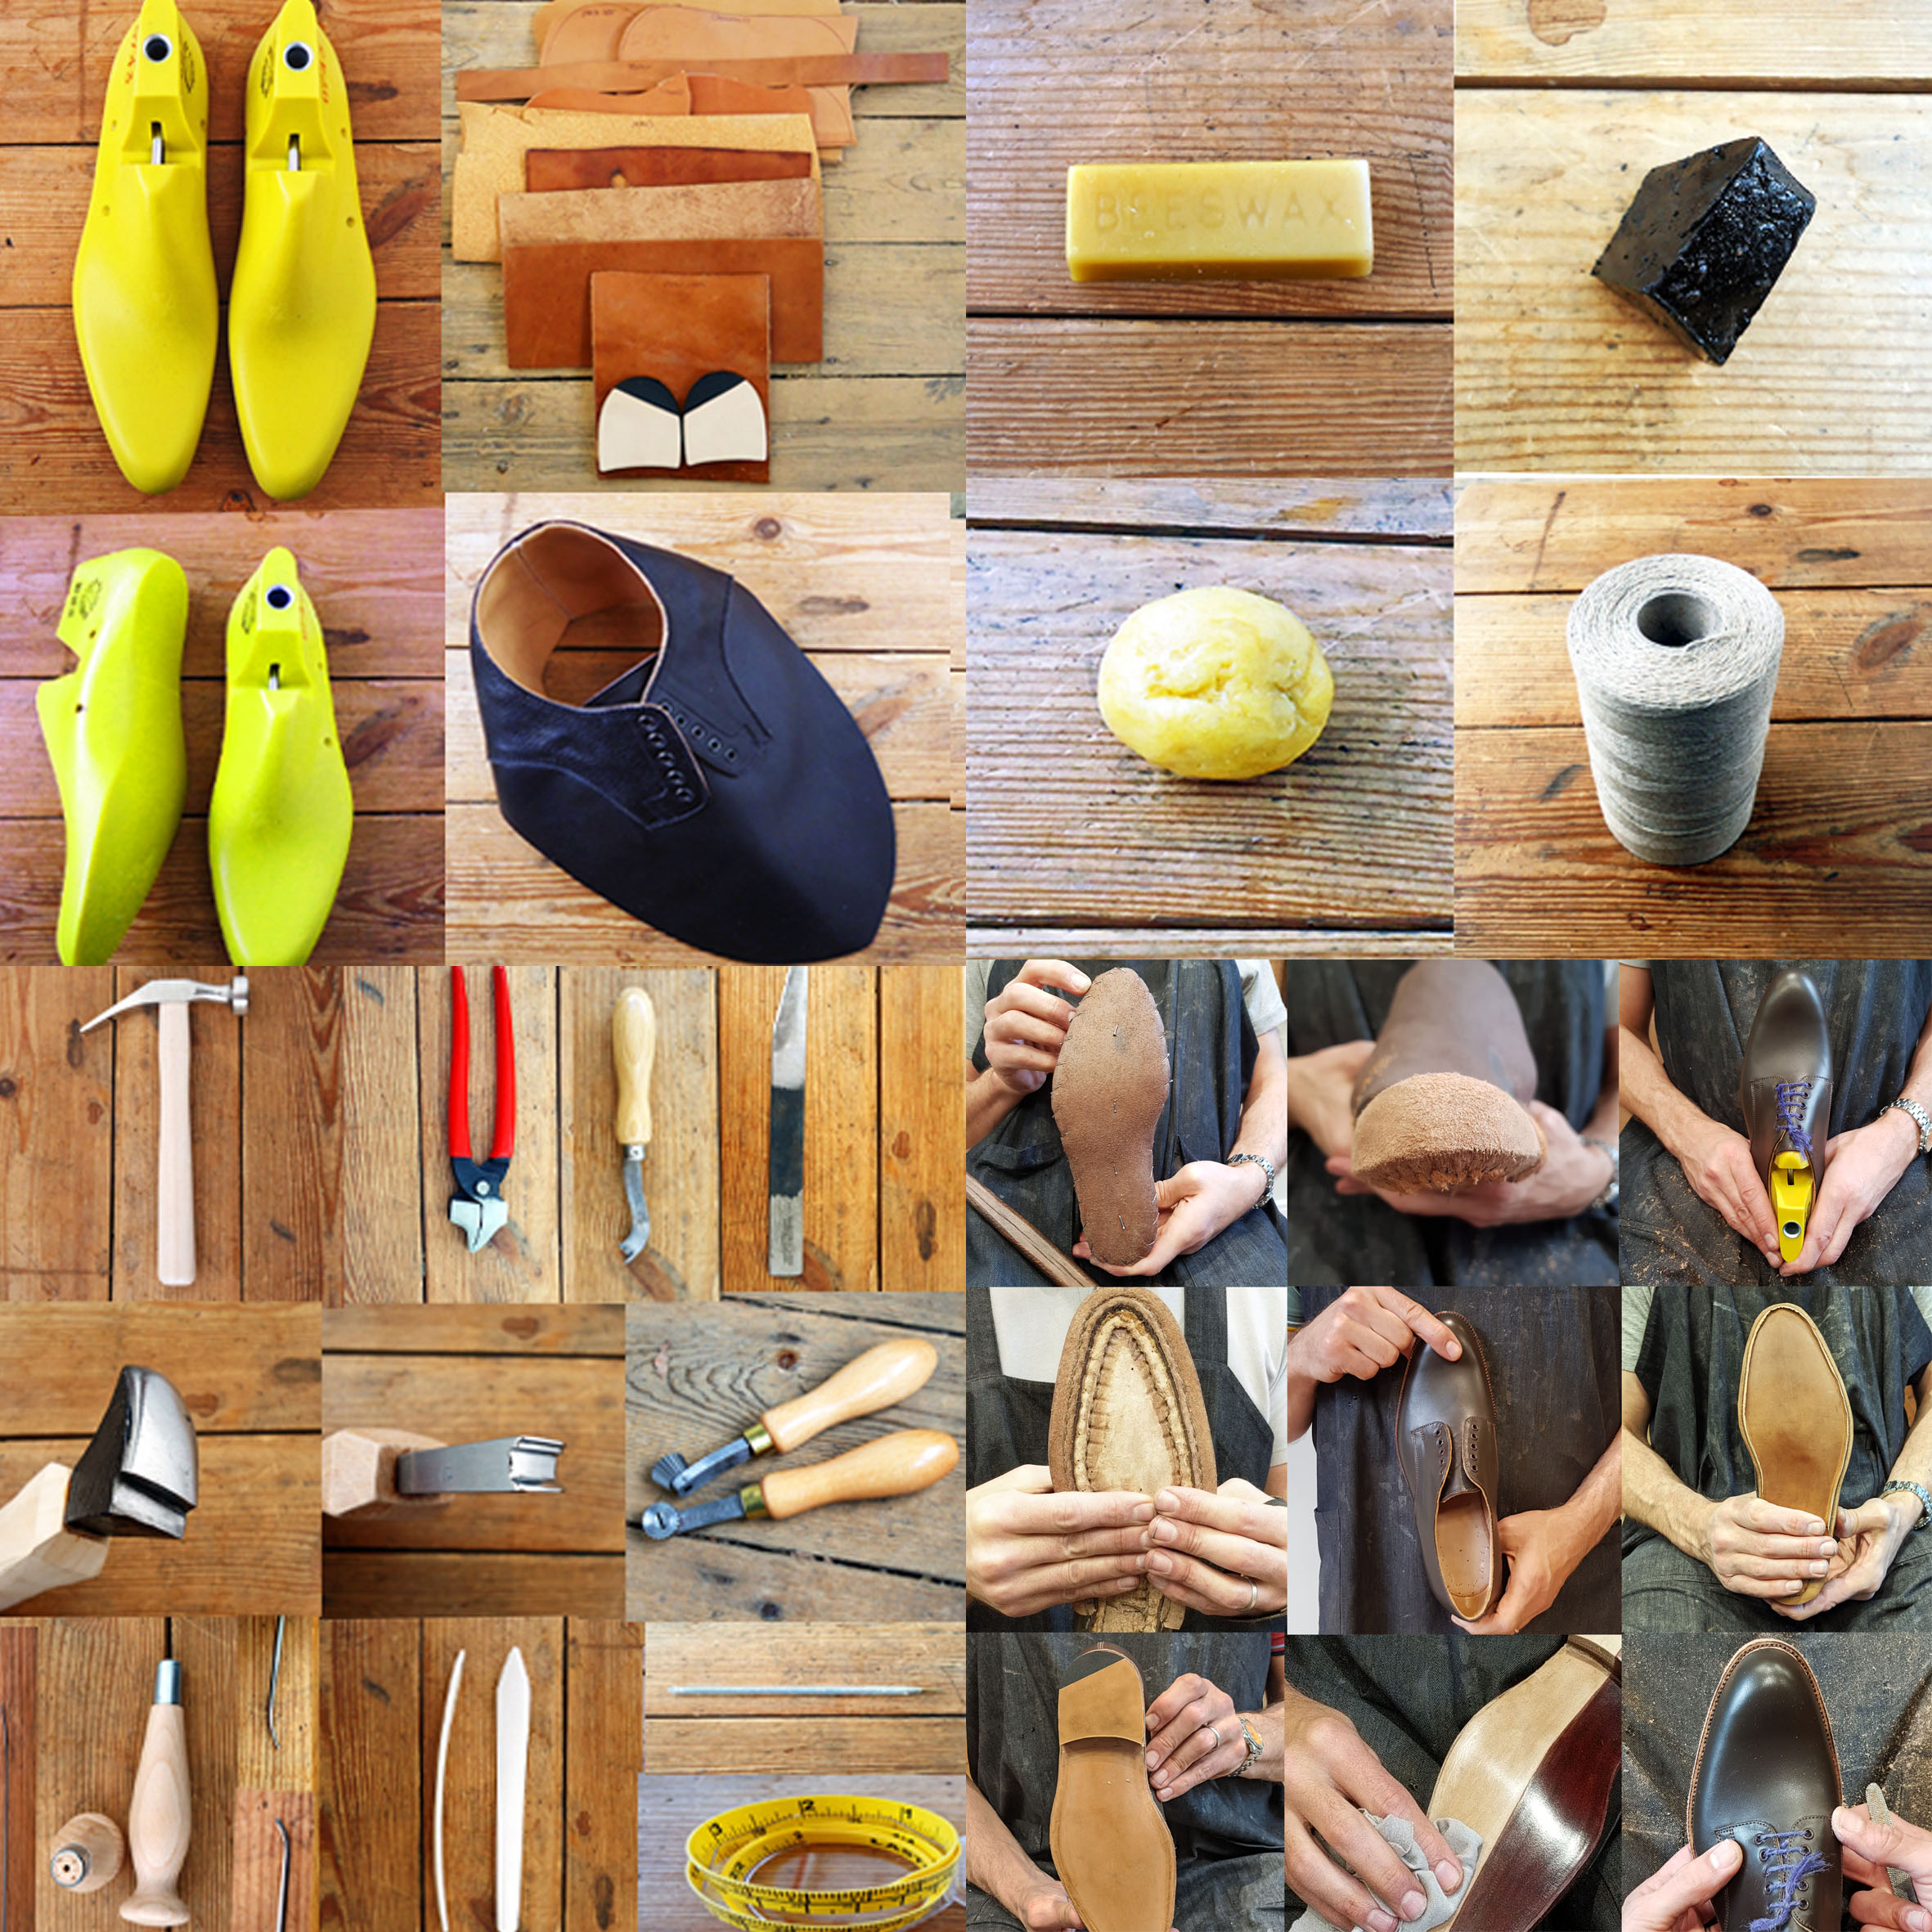 Shoe Making Kit | all you need to make shoes | Carreducker